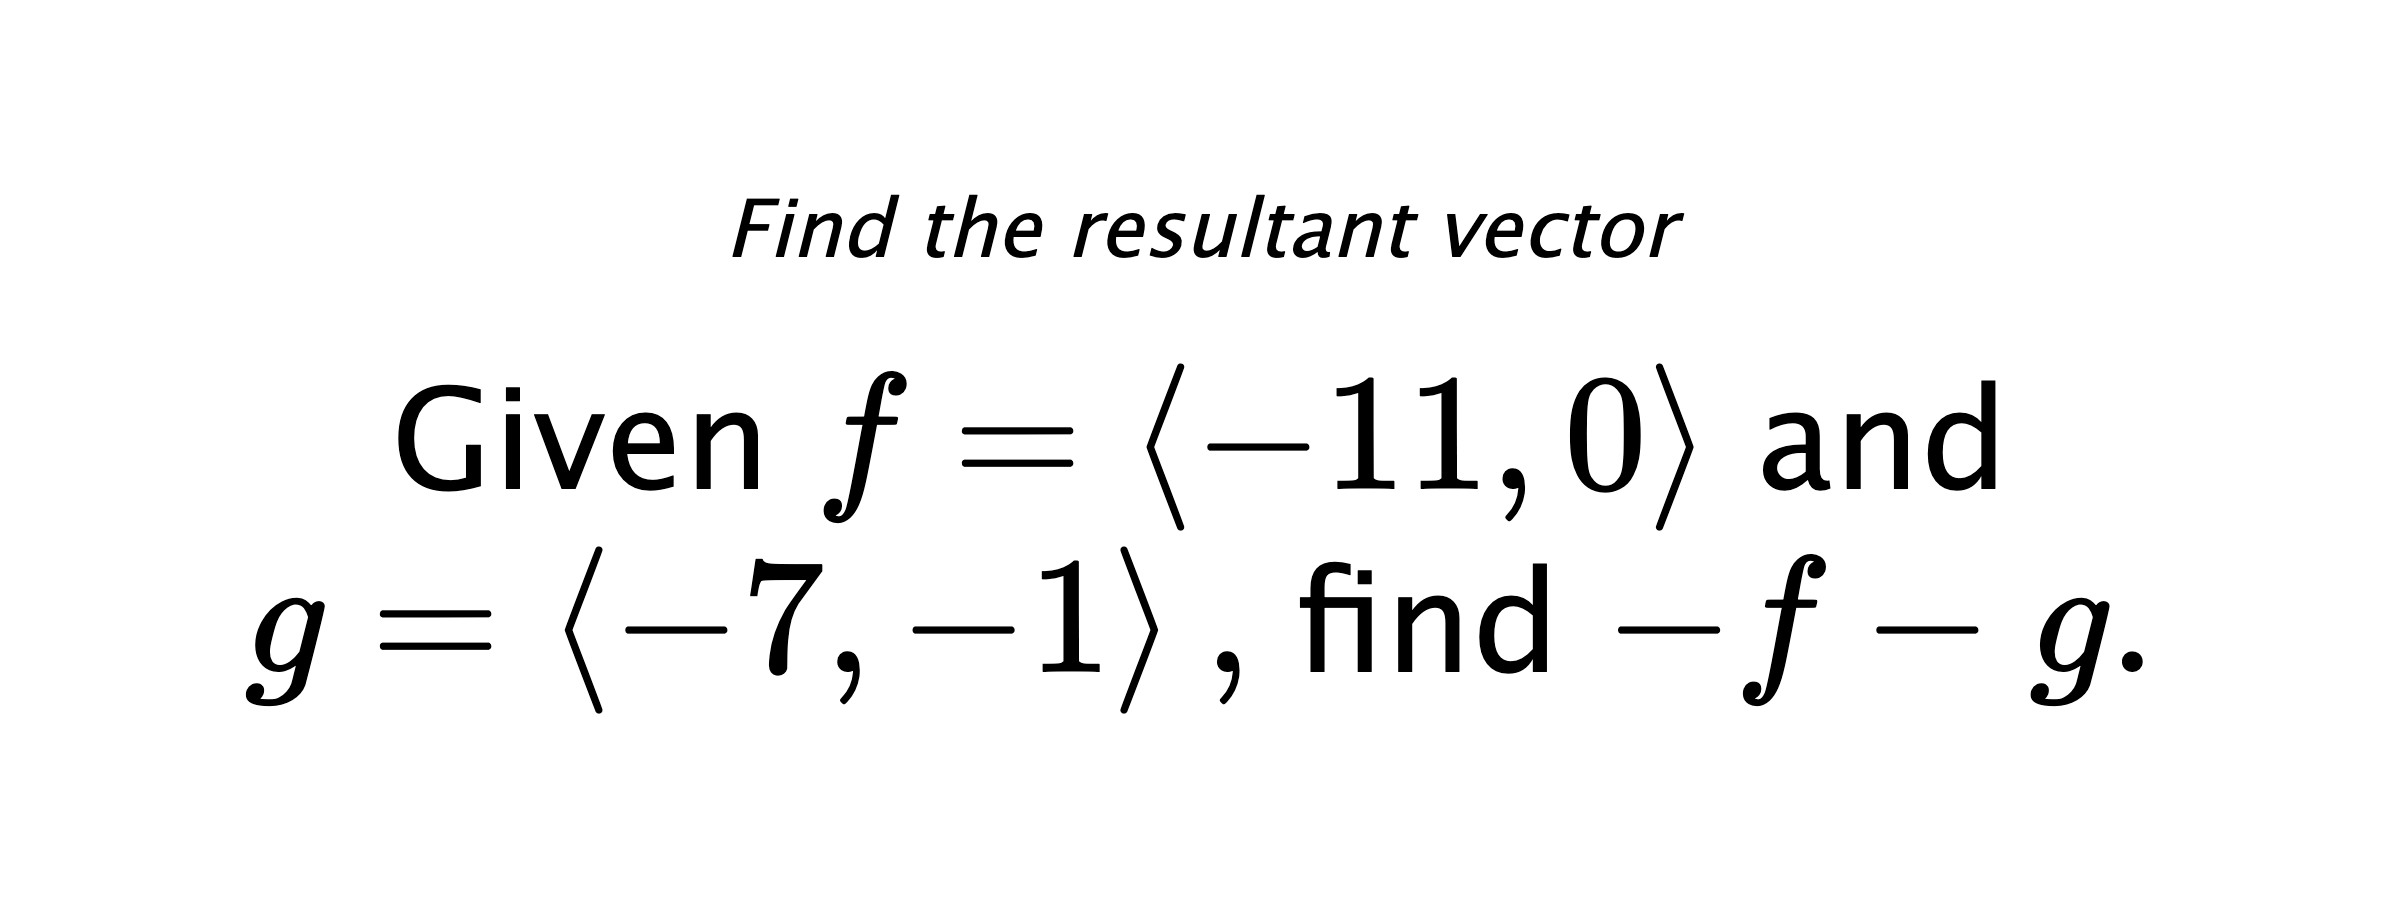 Find the resultant vector Given $ f = \left< -11,0 \right> $ and $ g = \left< -7,-1 \right> ,$ find $ -f-g .$